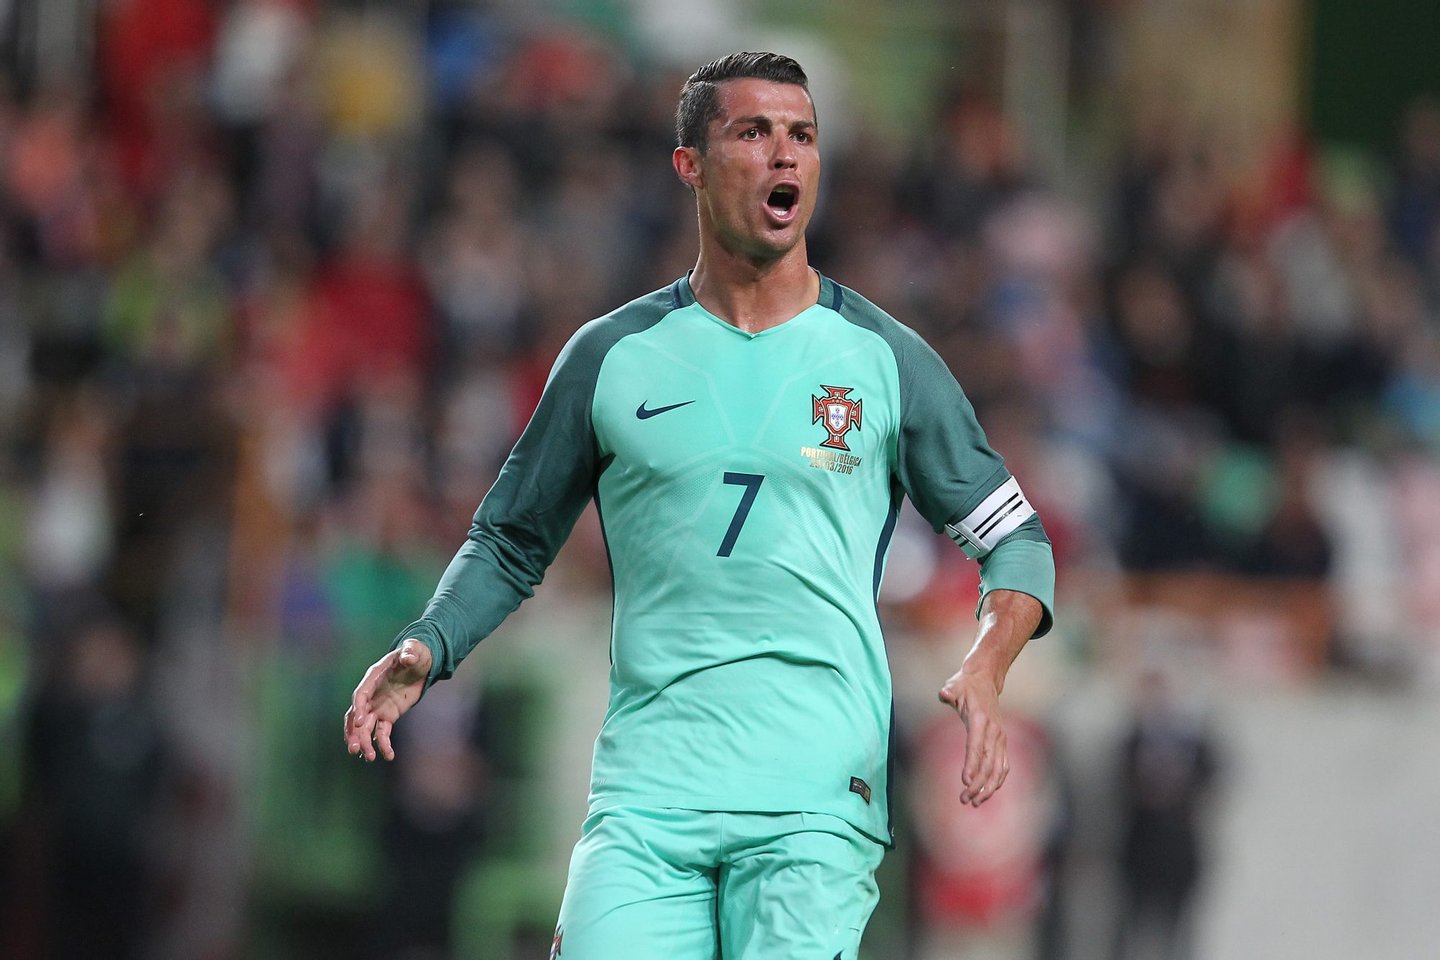 LEIRIA, PORTUGAL - MARCH 29: Portuguese's forward Cristiano Ronaldo celebrates scoring Portugal's second goal during the match between Portugal and BelgiumFriendly International at Estadio Municipal de Leiria on March 29, 2016 in Lisbon, Portugal. (Photo by Carlos Rodrigues/Getty Images)